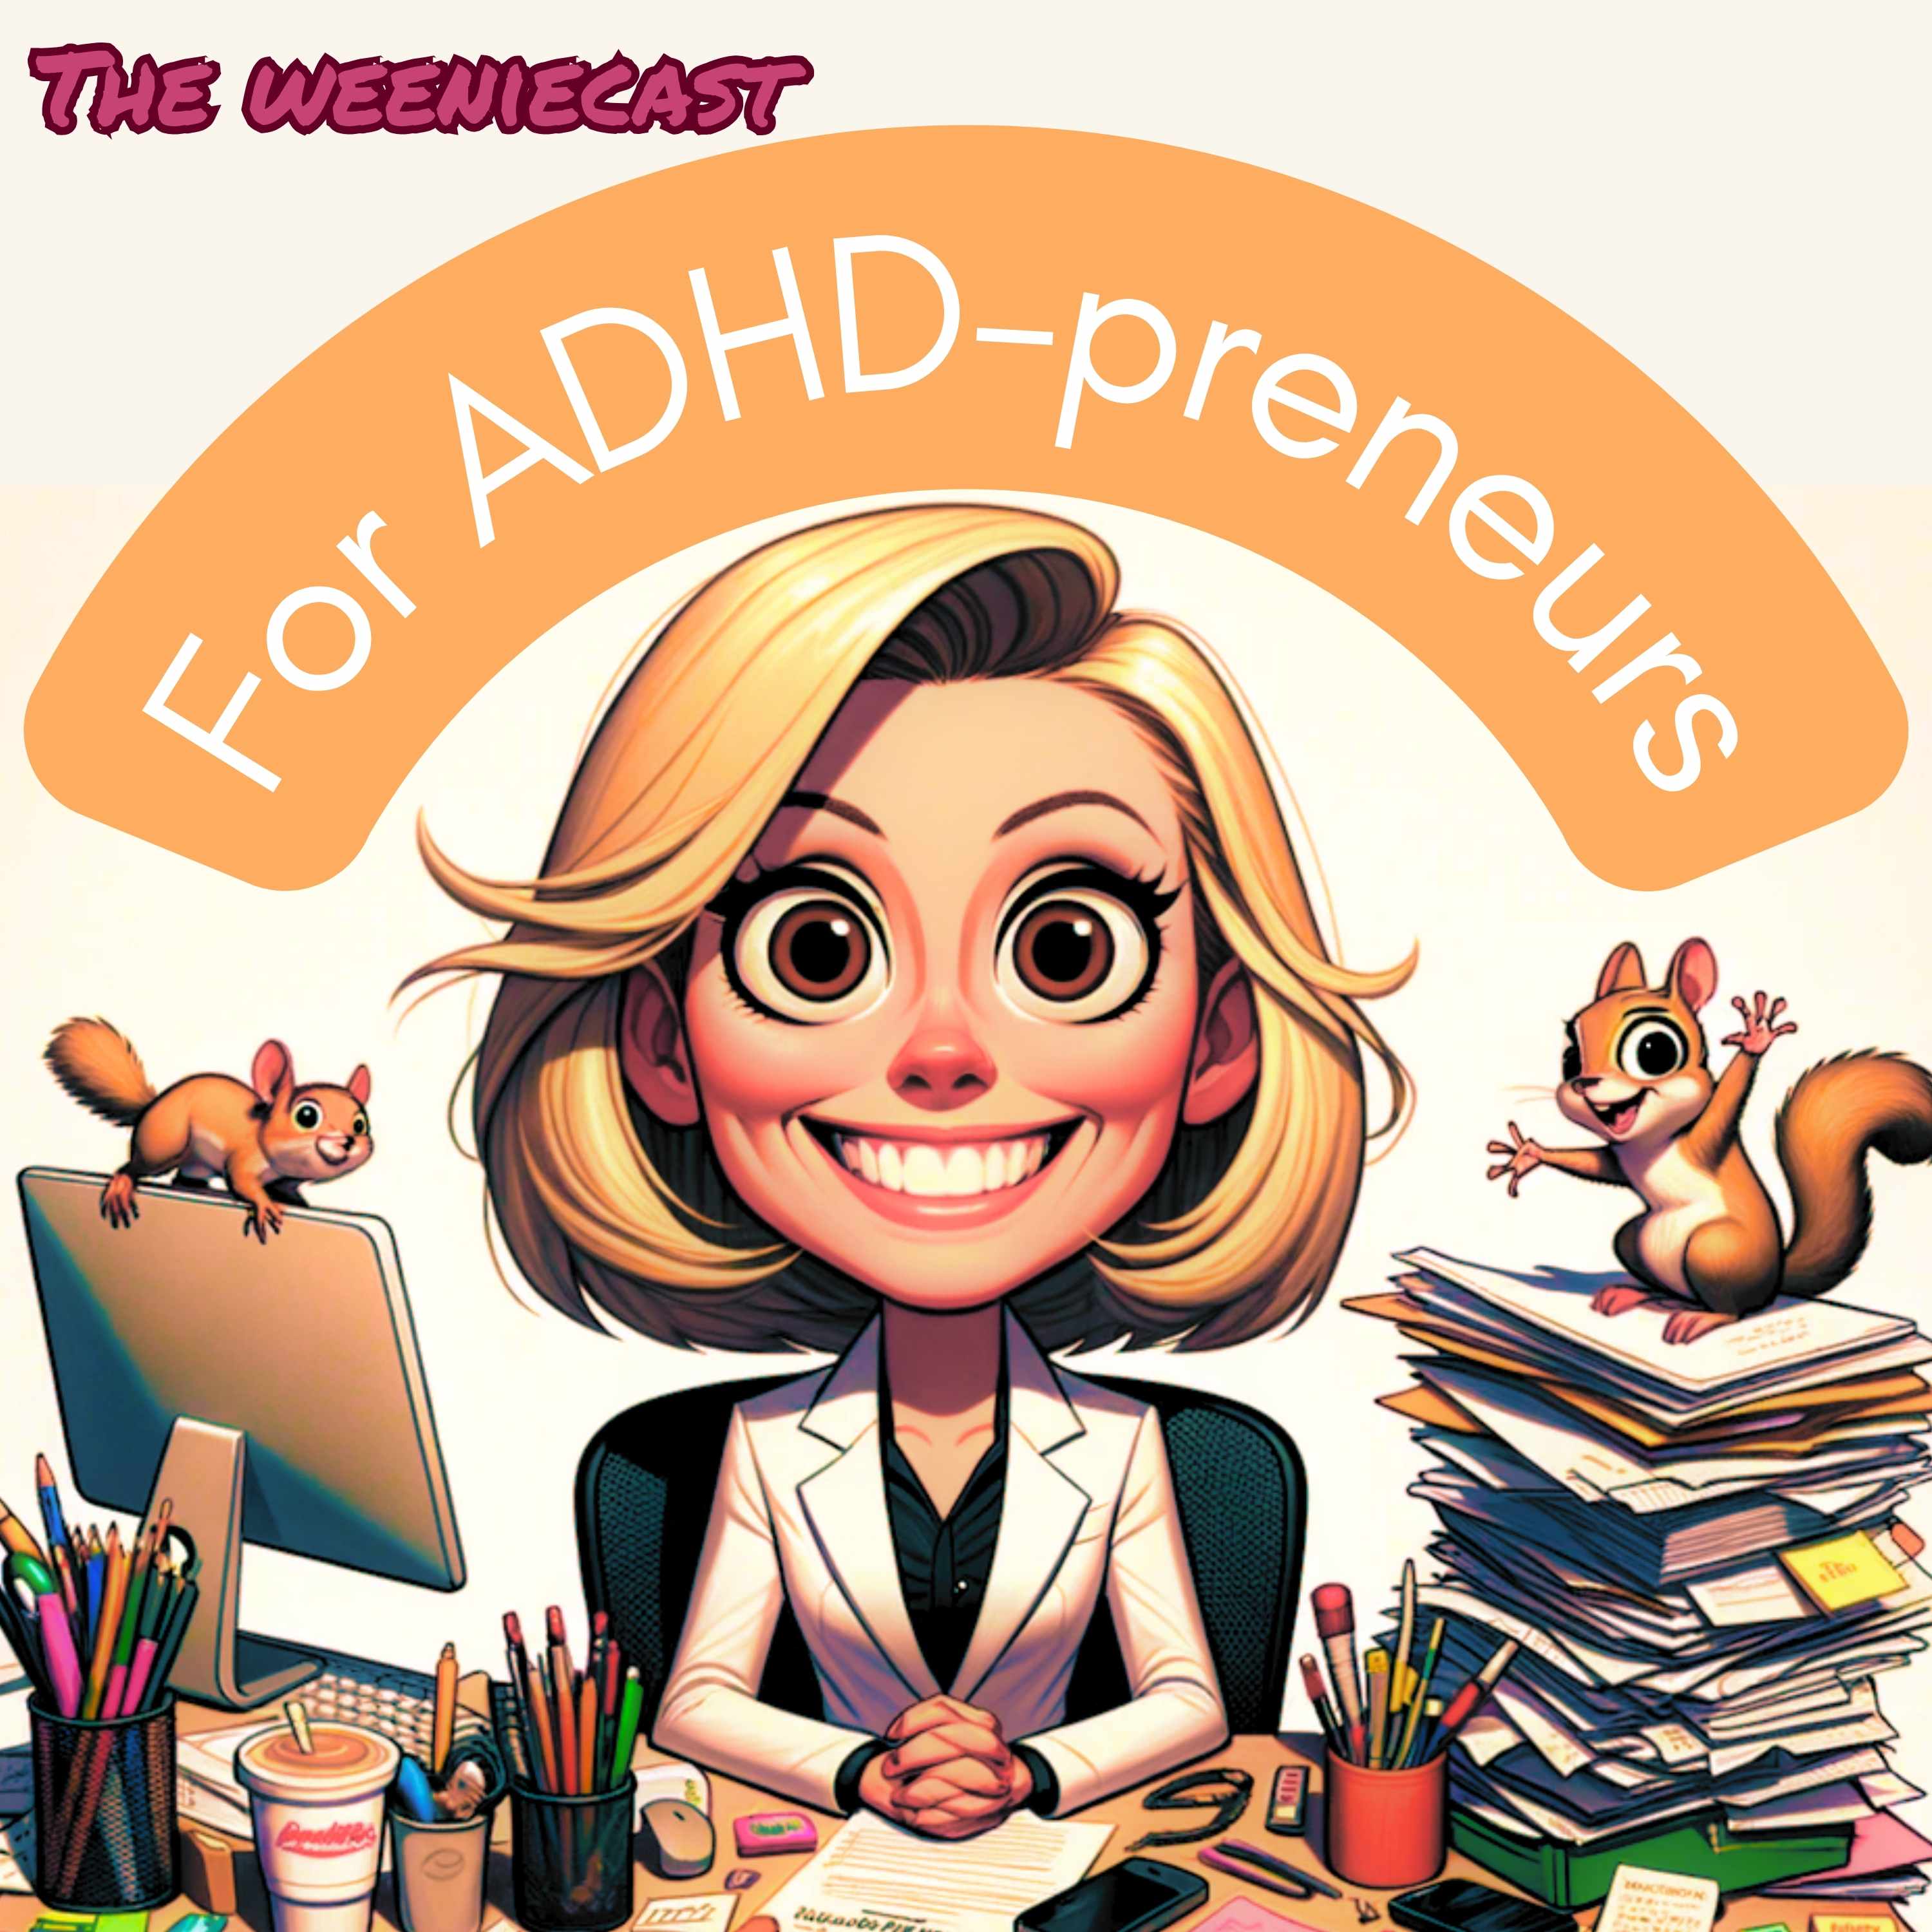 Show artwork for The Weeniecast - for ADHD entrepreneurs and neurodivergent business owners